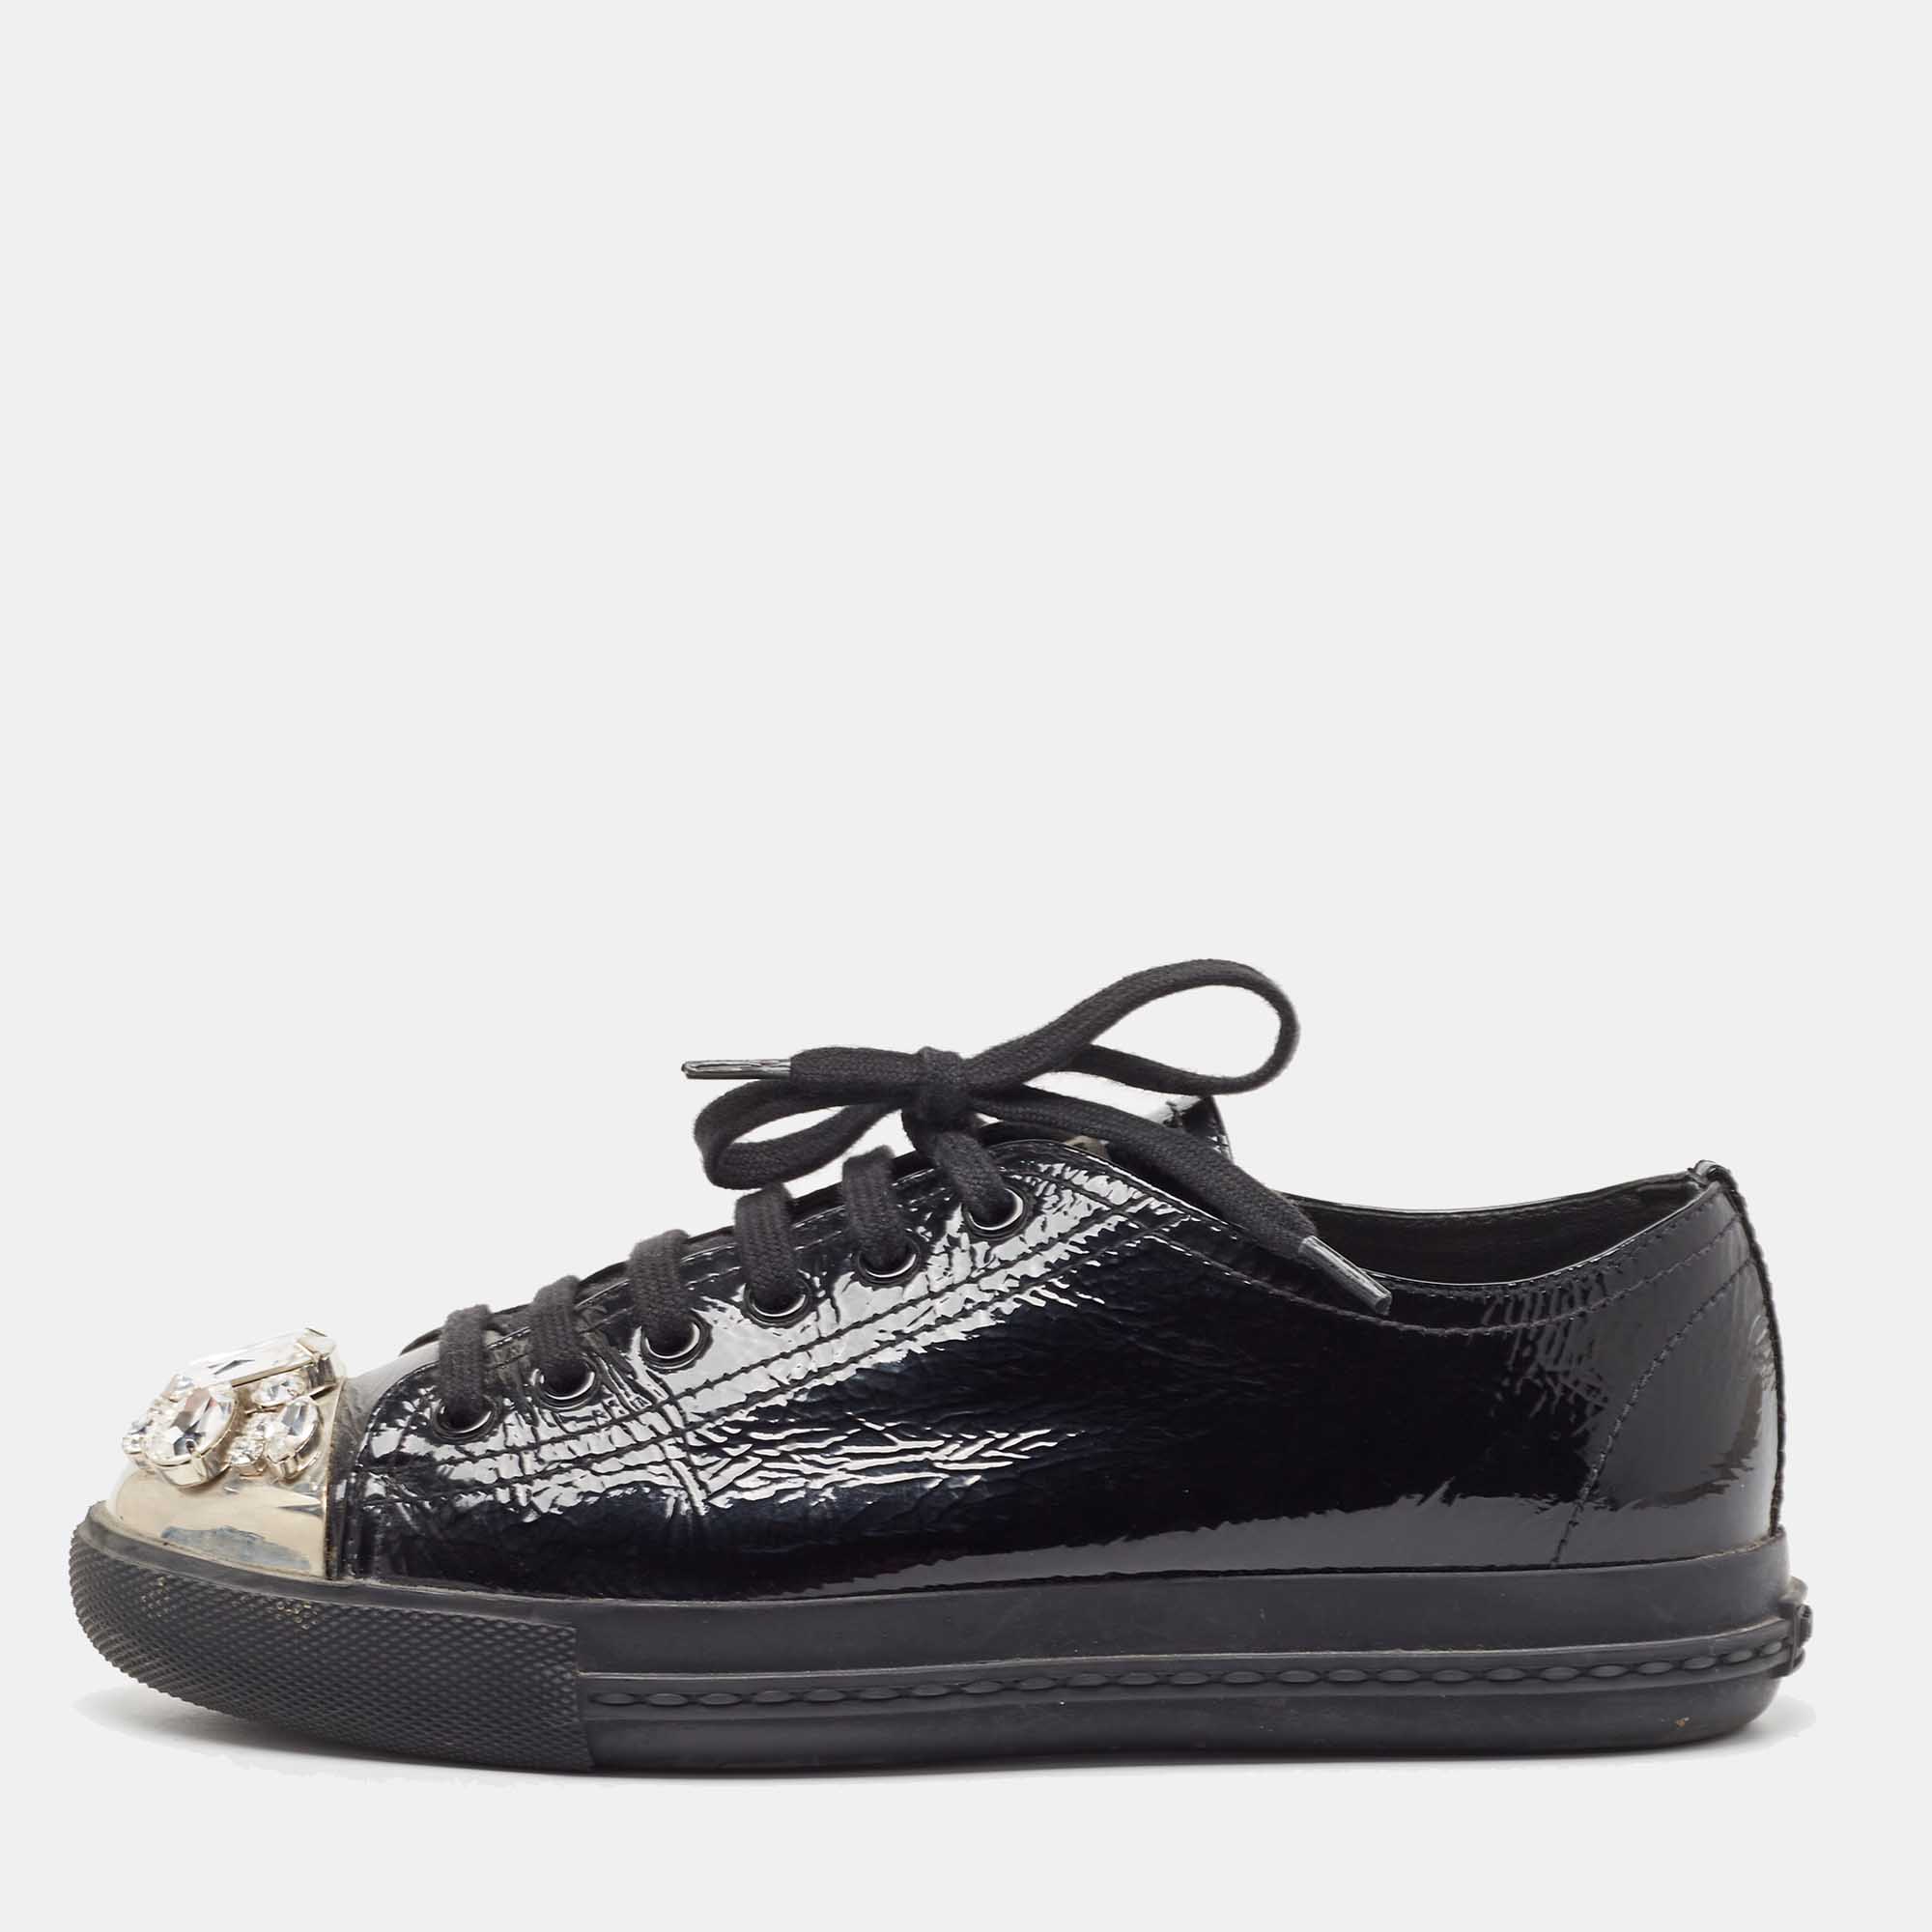 Pre-owned Miu Miu Black Patent Leather Crystal Studded Trainers Size 37